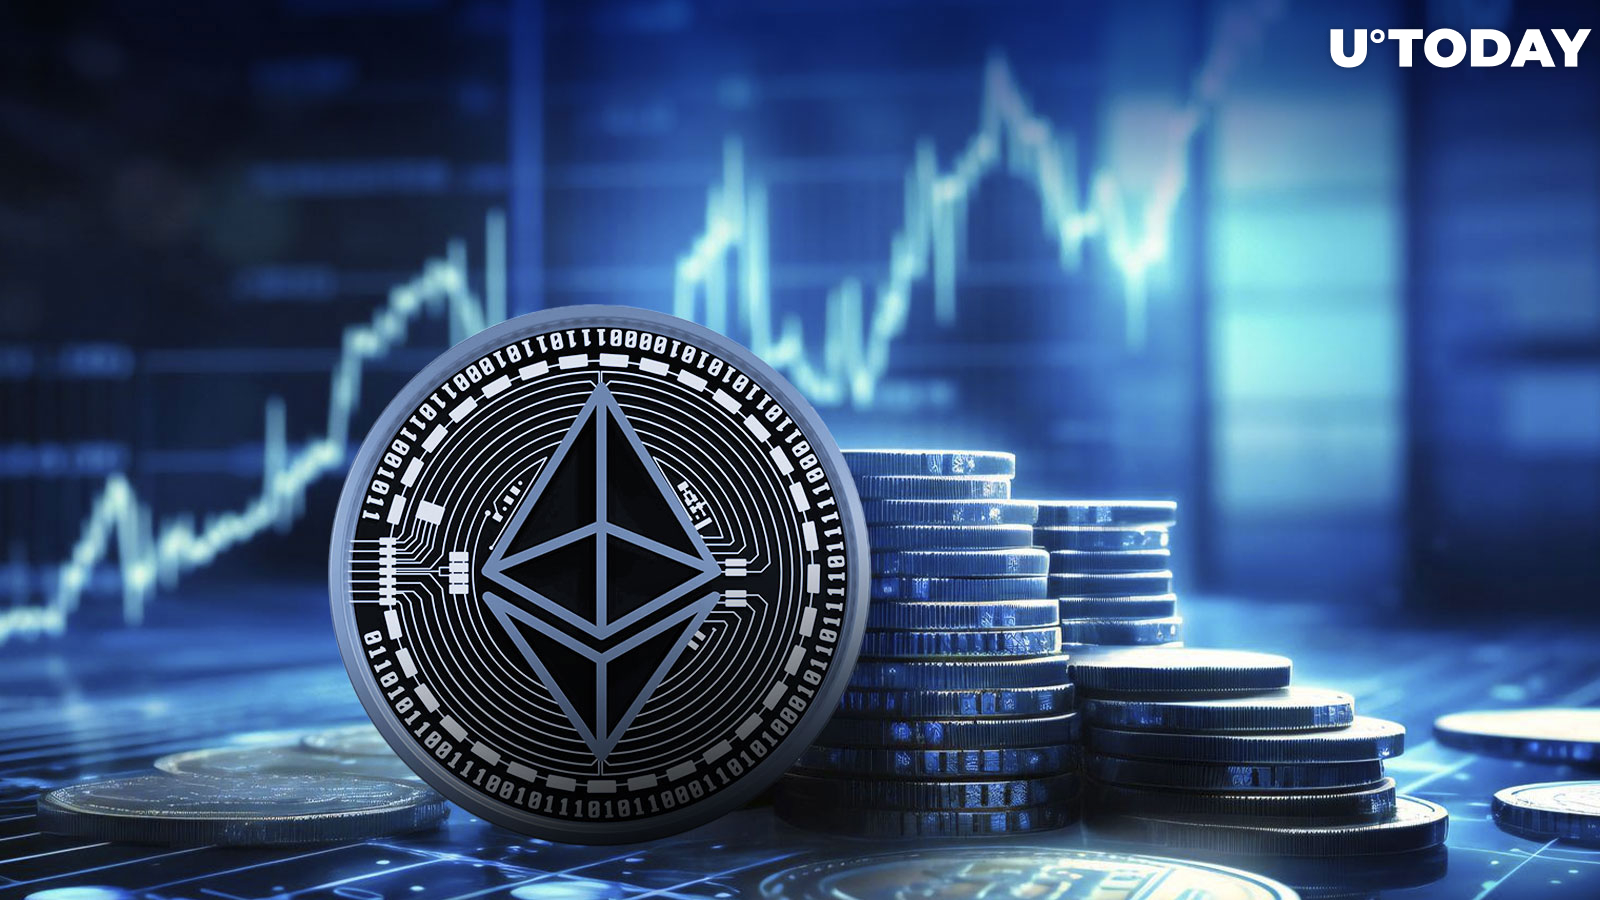 Ethereum (ETH) Jumps to Highest Level Since March 2022